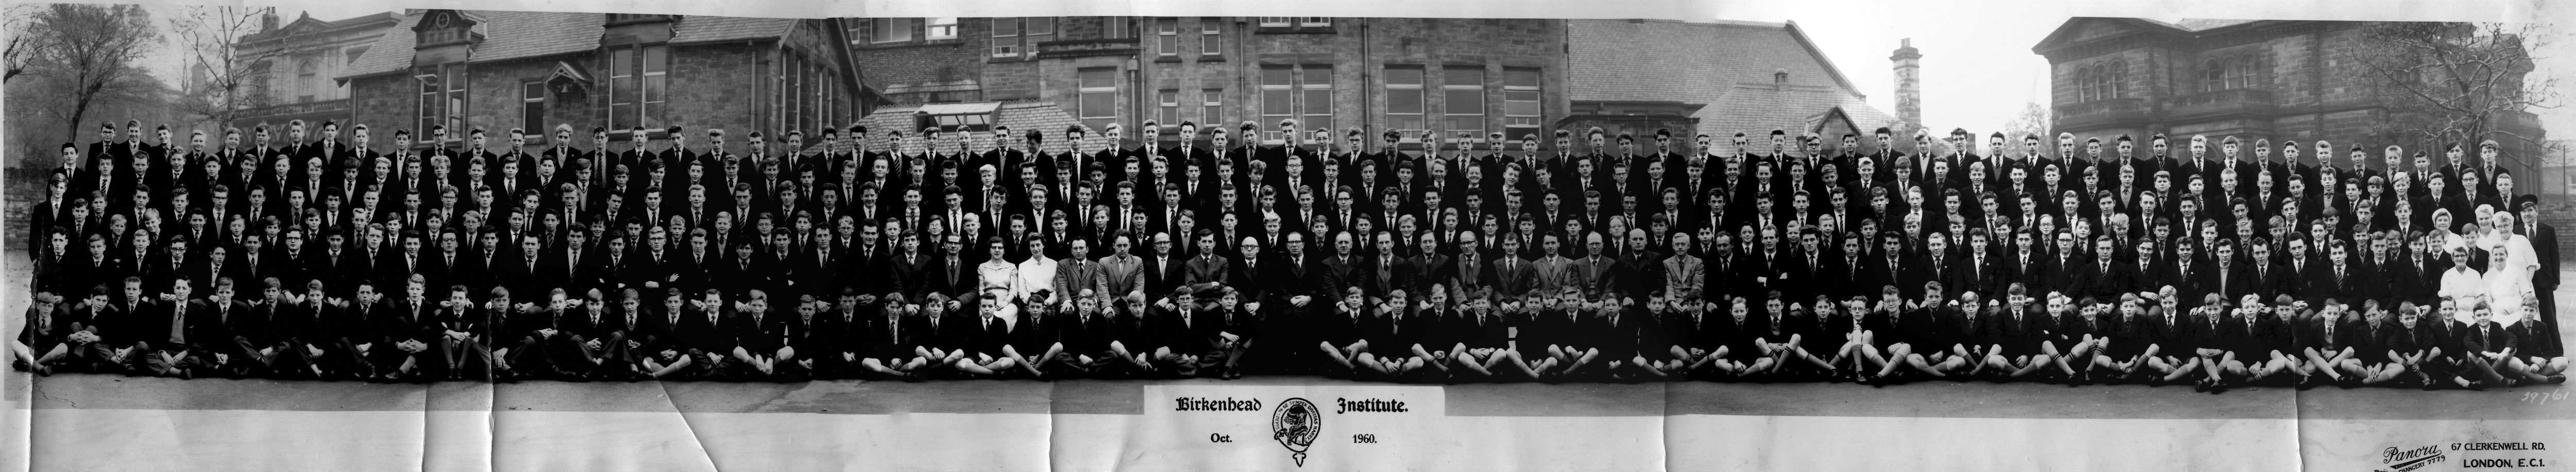 Whole School Photograph - October 1960